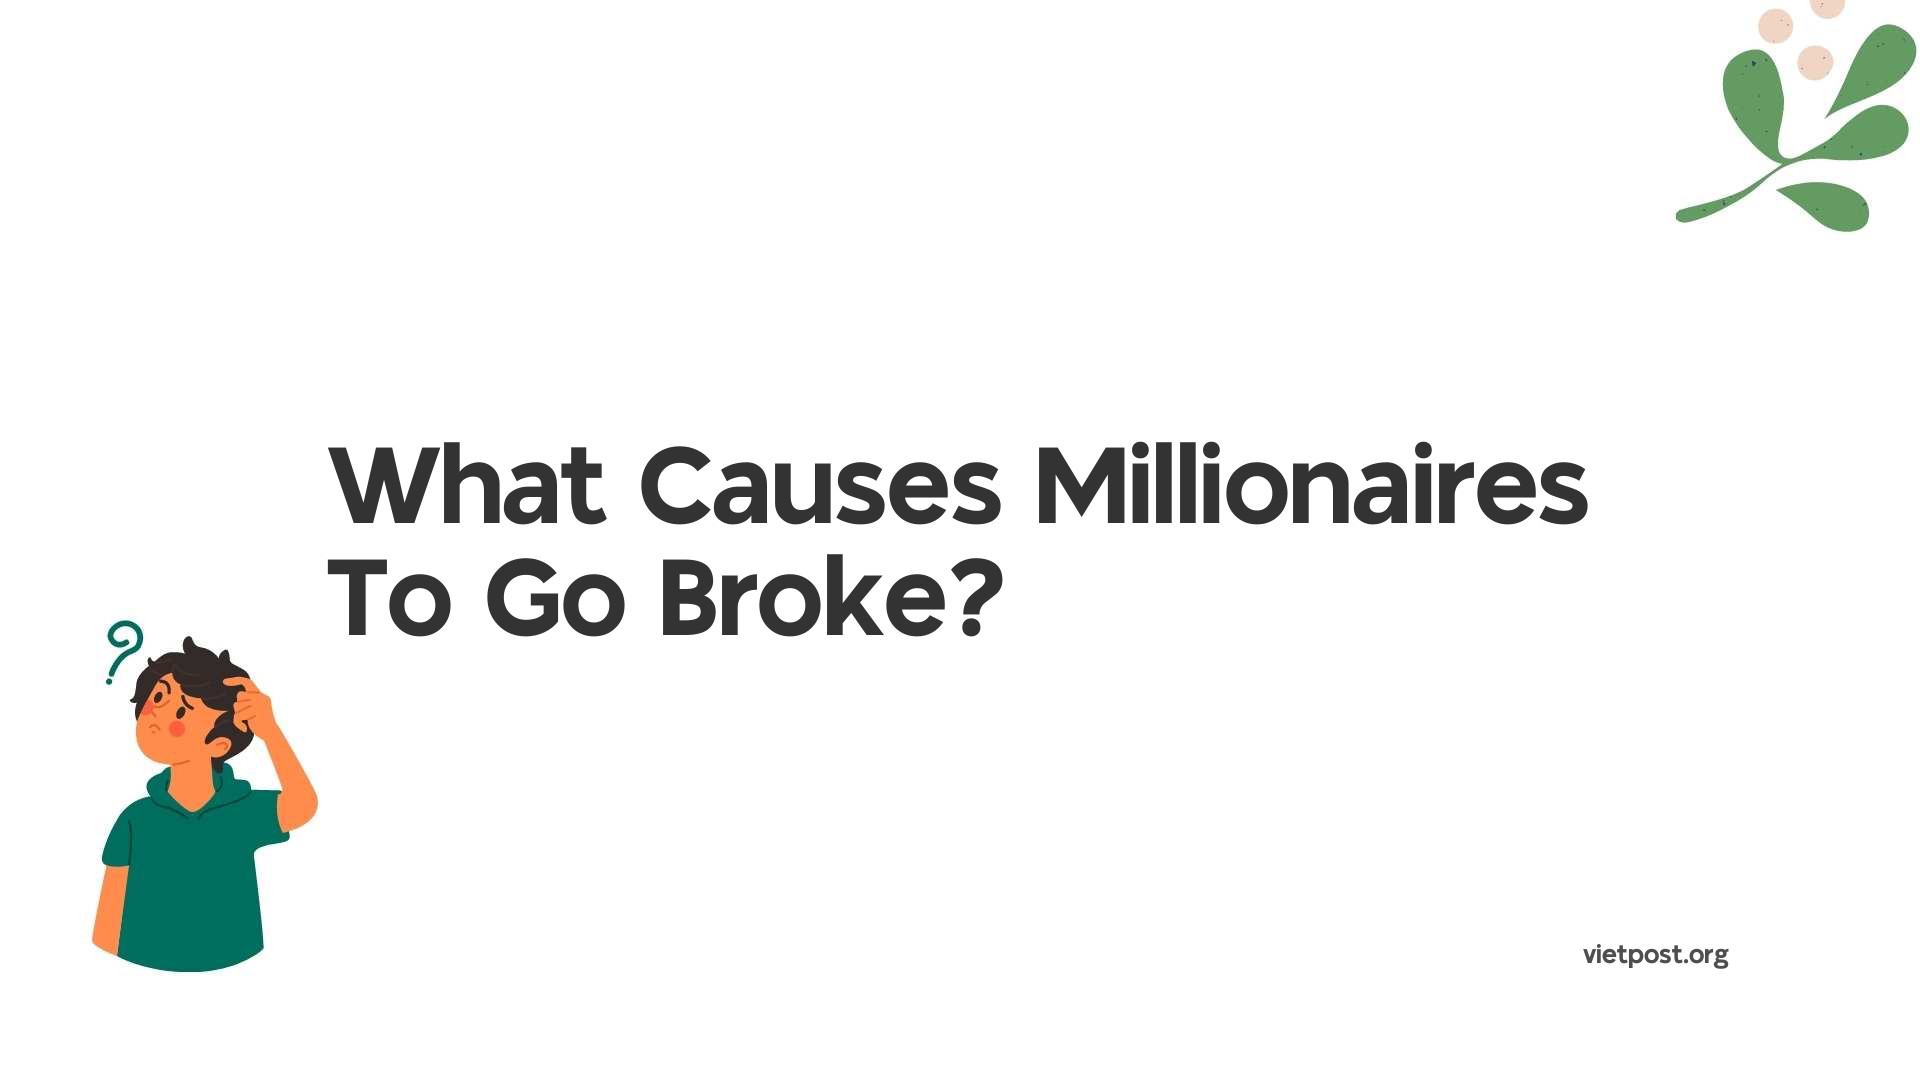 What Causes Millionaires To Go Broke?